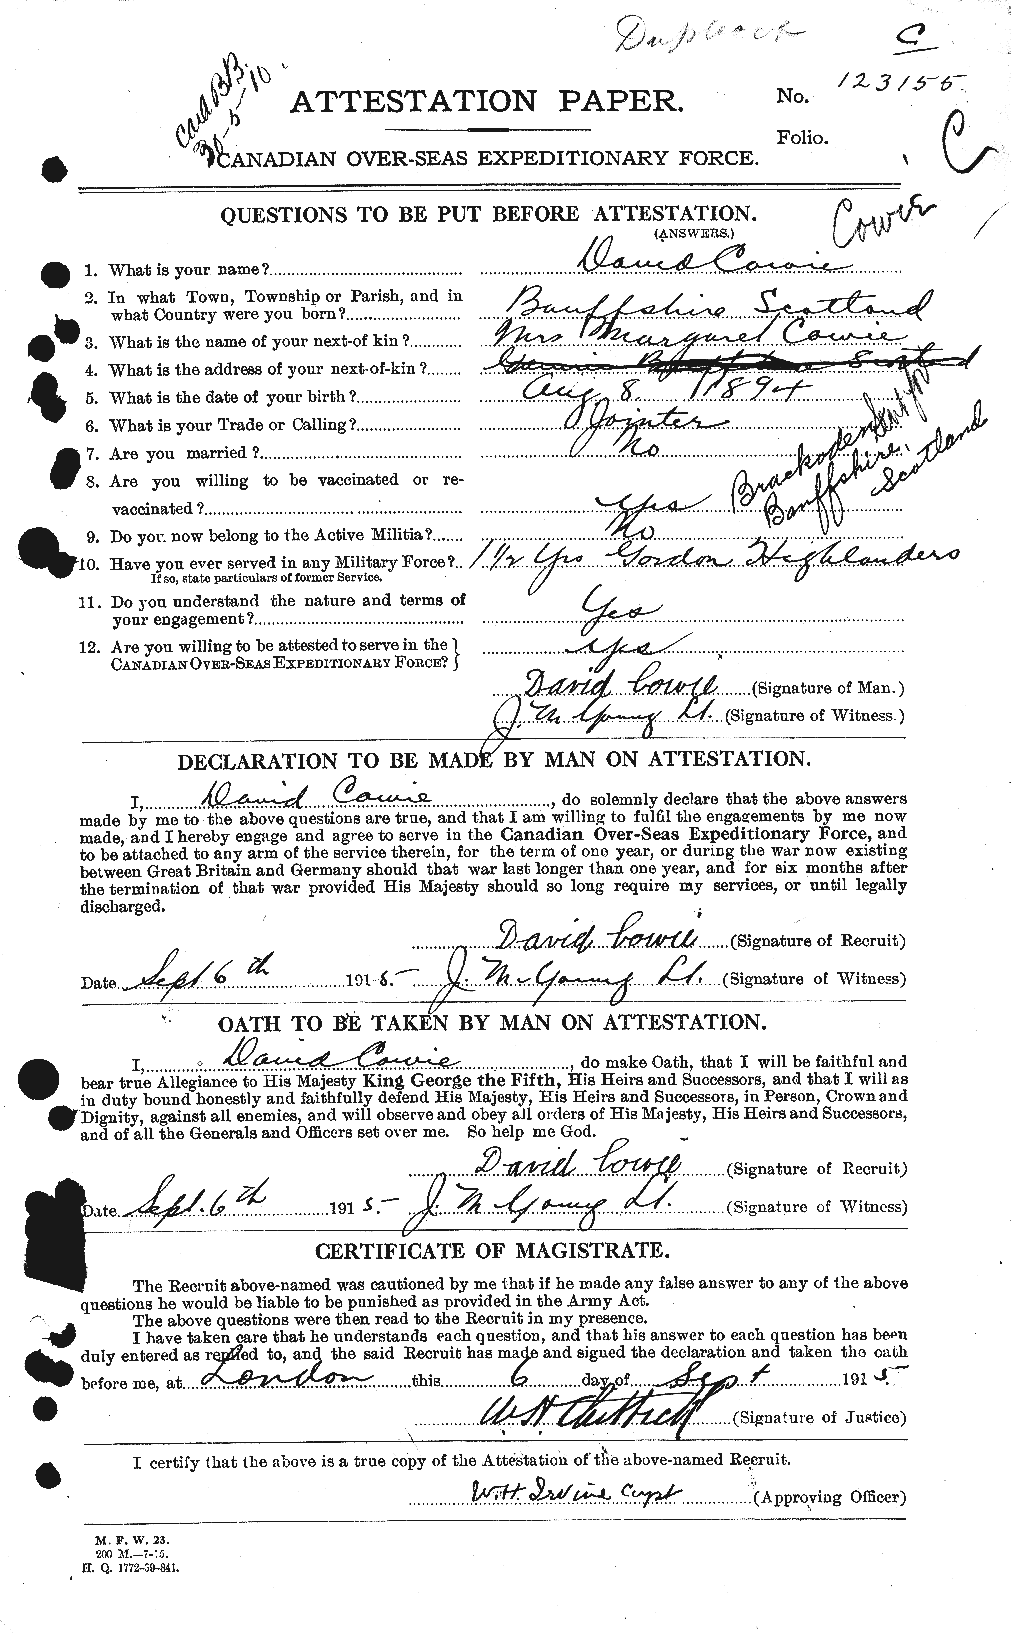 Personnel Records of the First World War - CEF 060026a